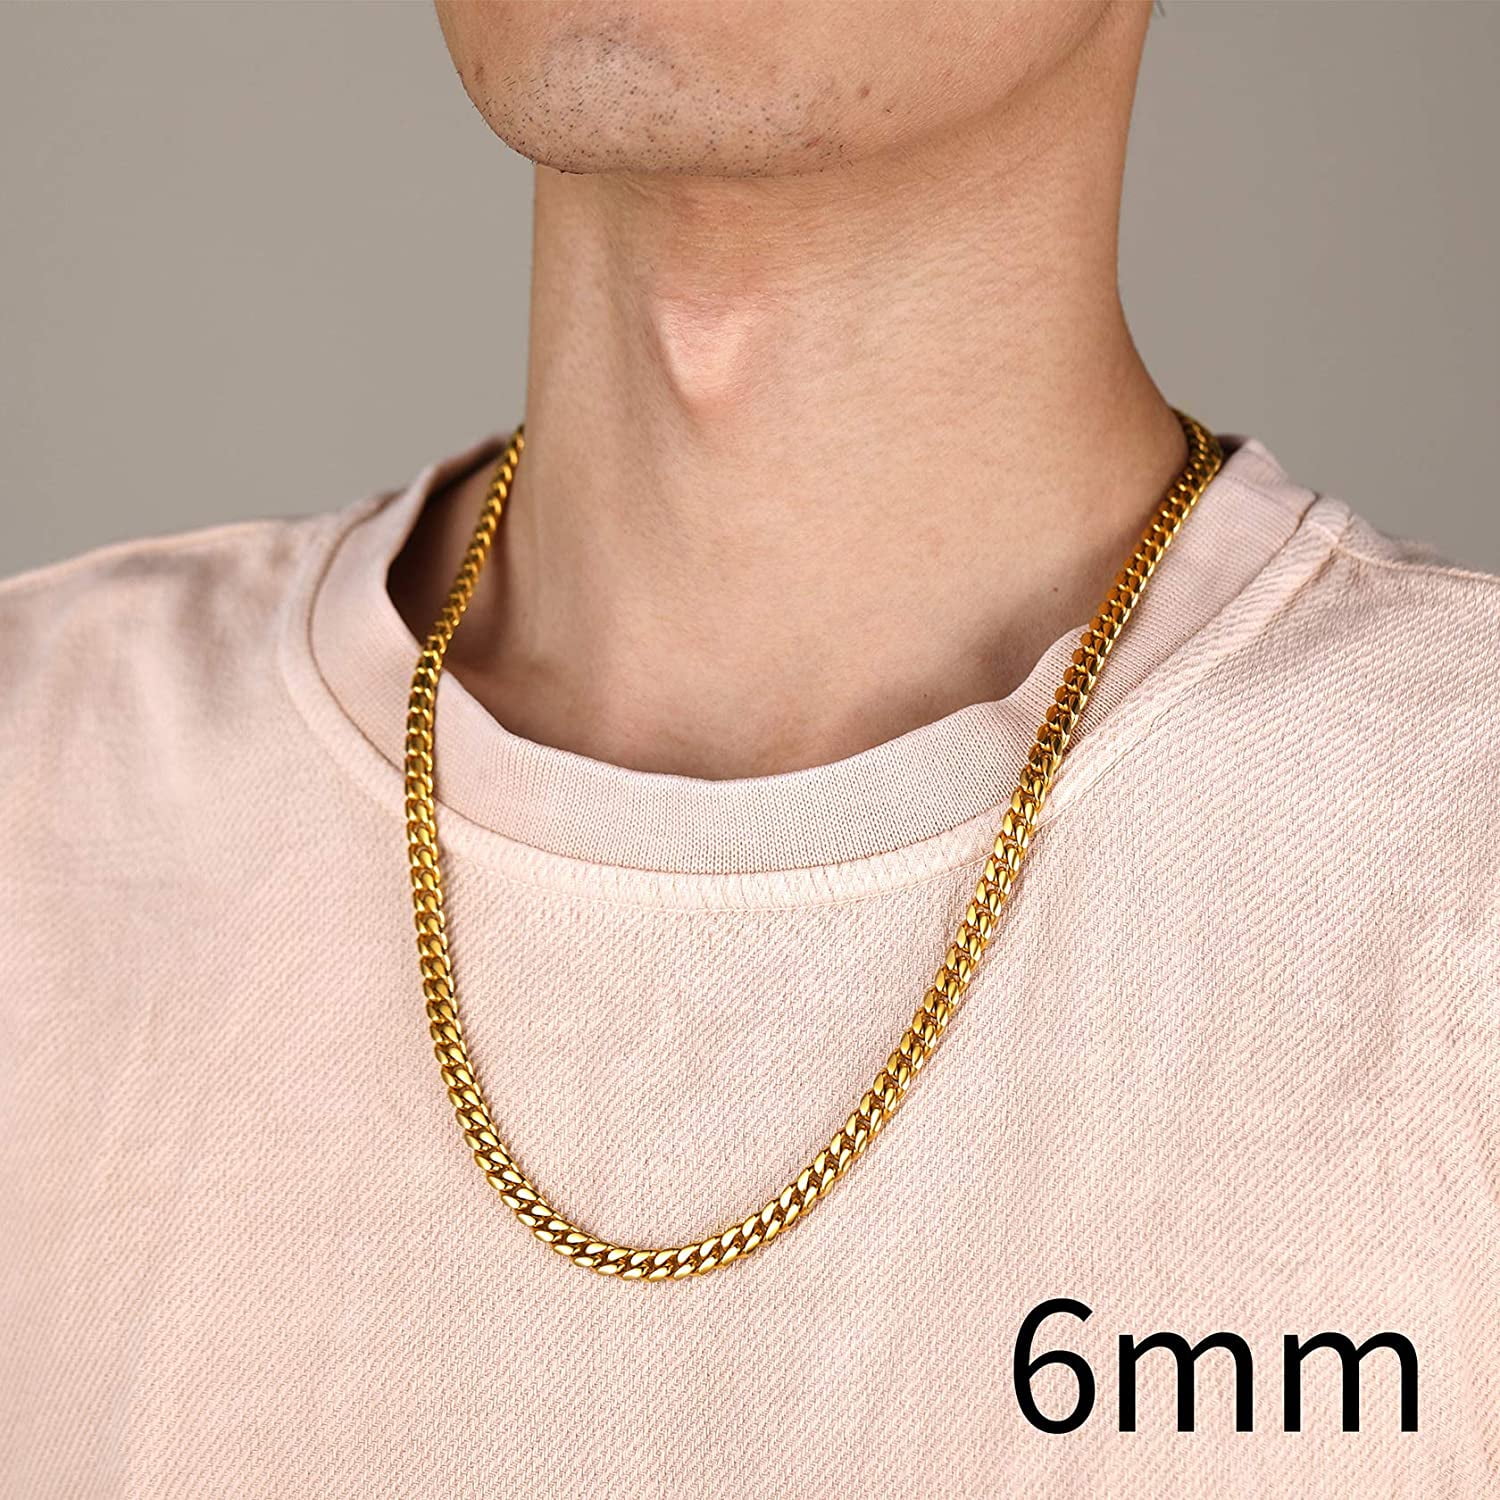 Chainspromax Men Women Luxury Filled Curb Cuban Link Gold Necklace Jewelry Chain 3mm 18 inch Choker, Adult Unisex, Size: One Size